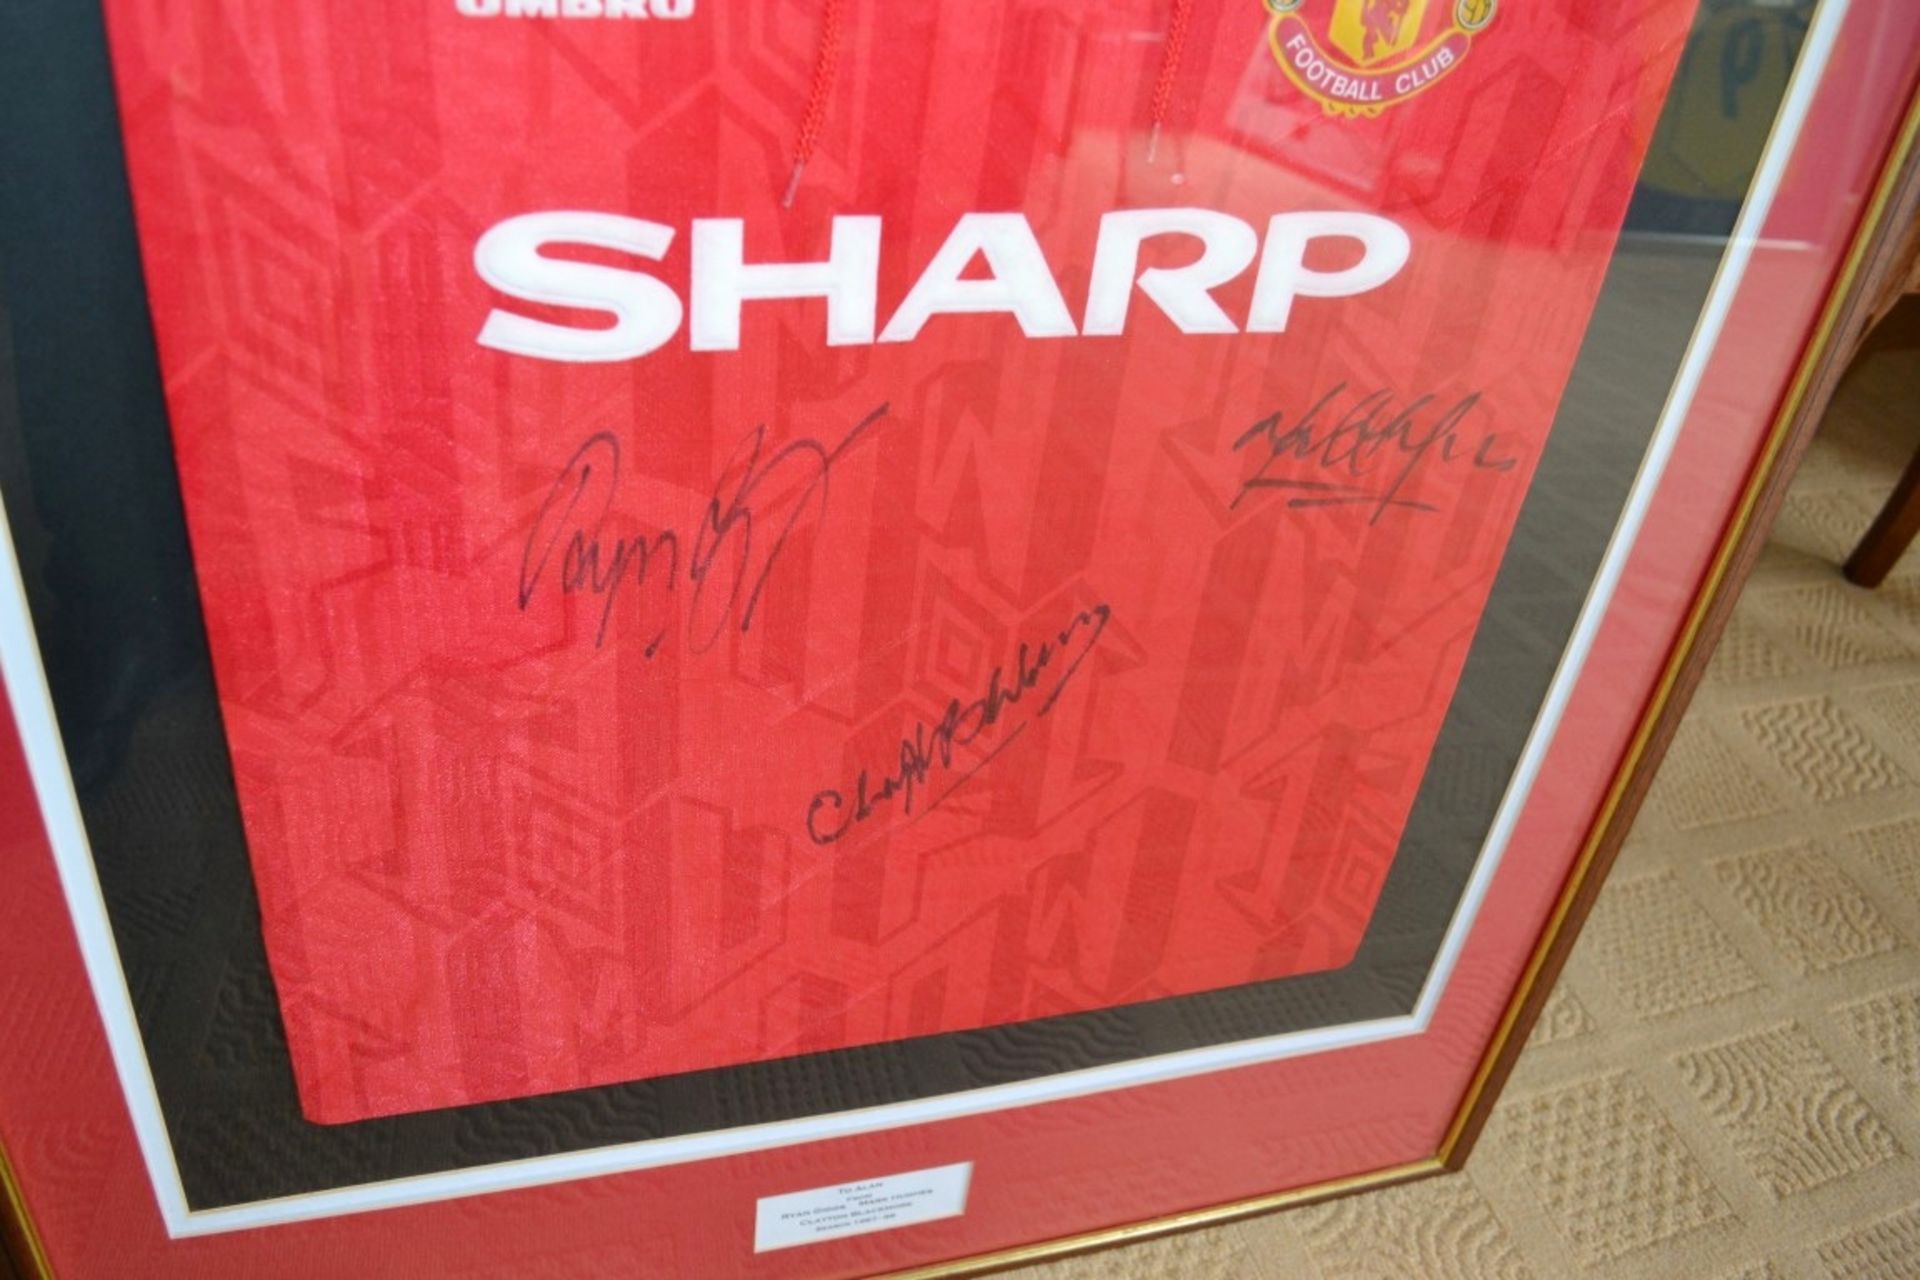 1 x Framed And Mounted Ryan Giggs Signed Football Shirt Autographed By 3 Players (Giggs, Hughes - Image 4 of 7